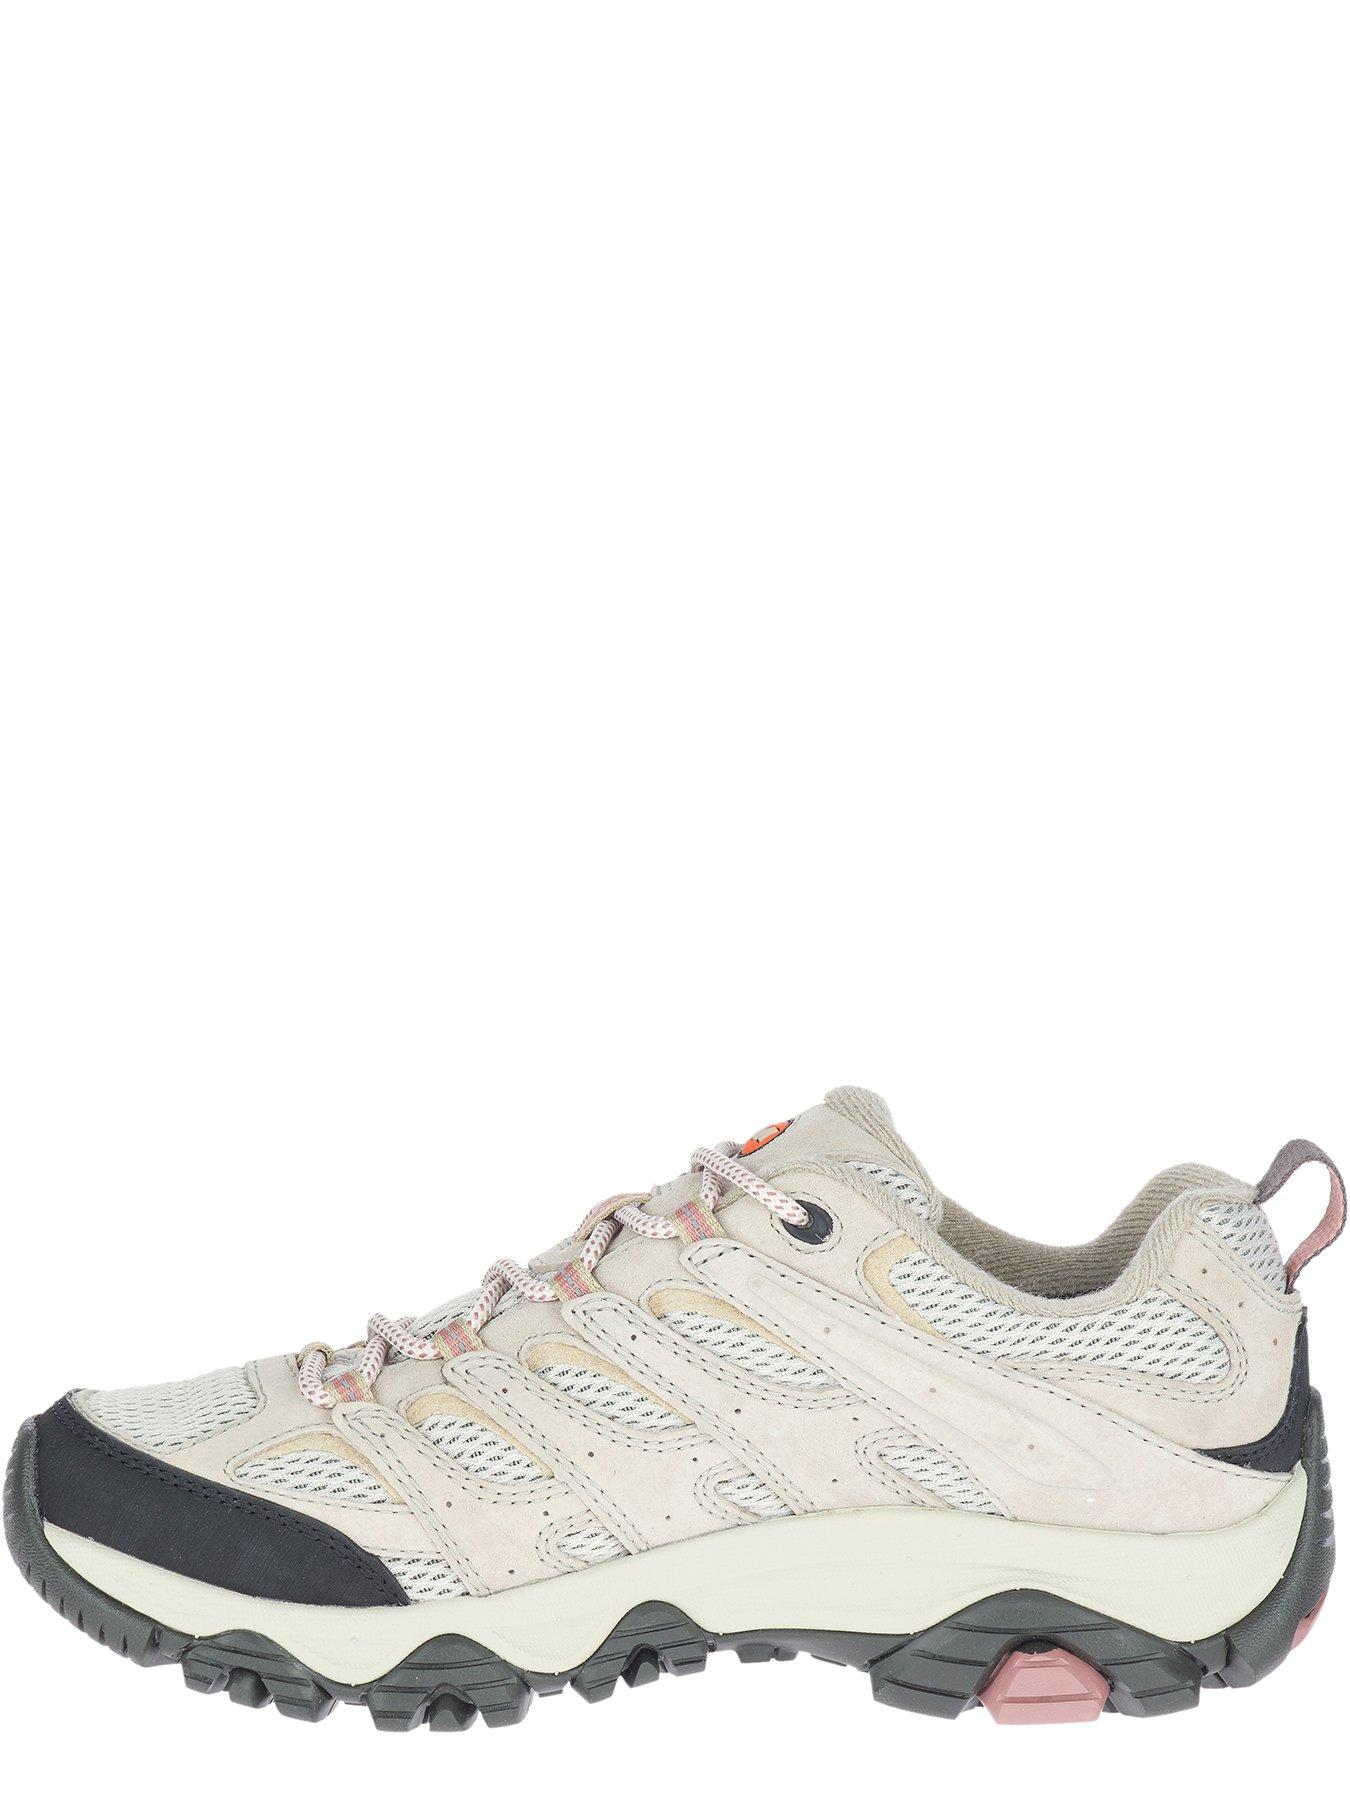 Merrell Women's Moab 3 GORE-TEX Hiking Shoes - Off White | Very.co.uk